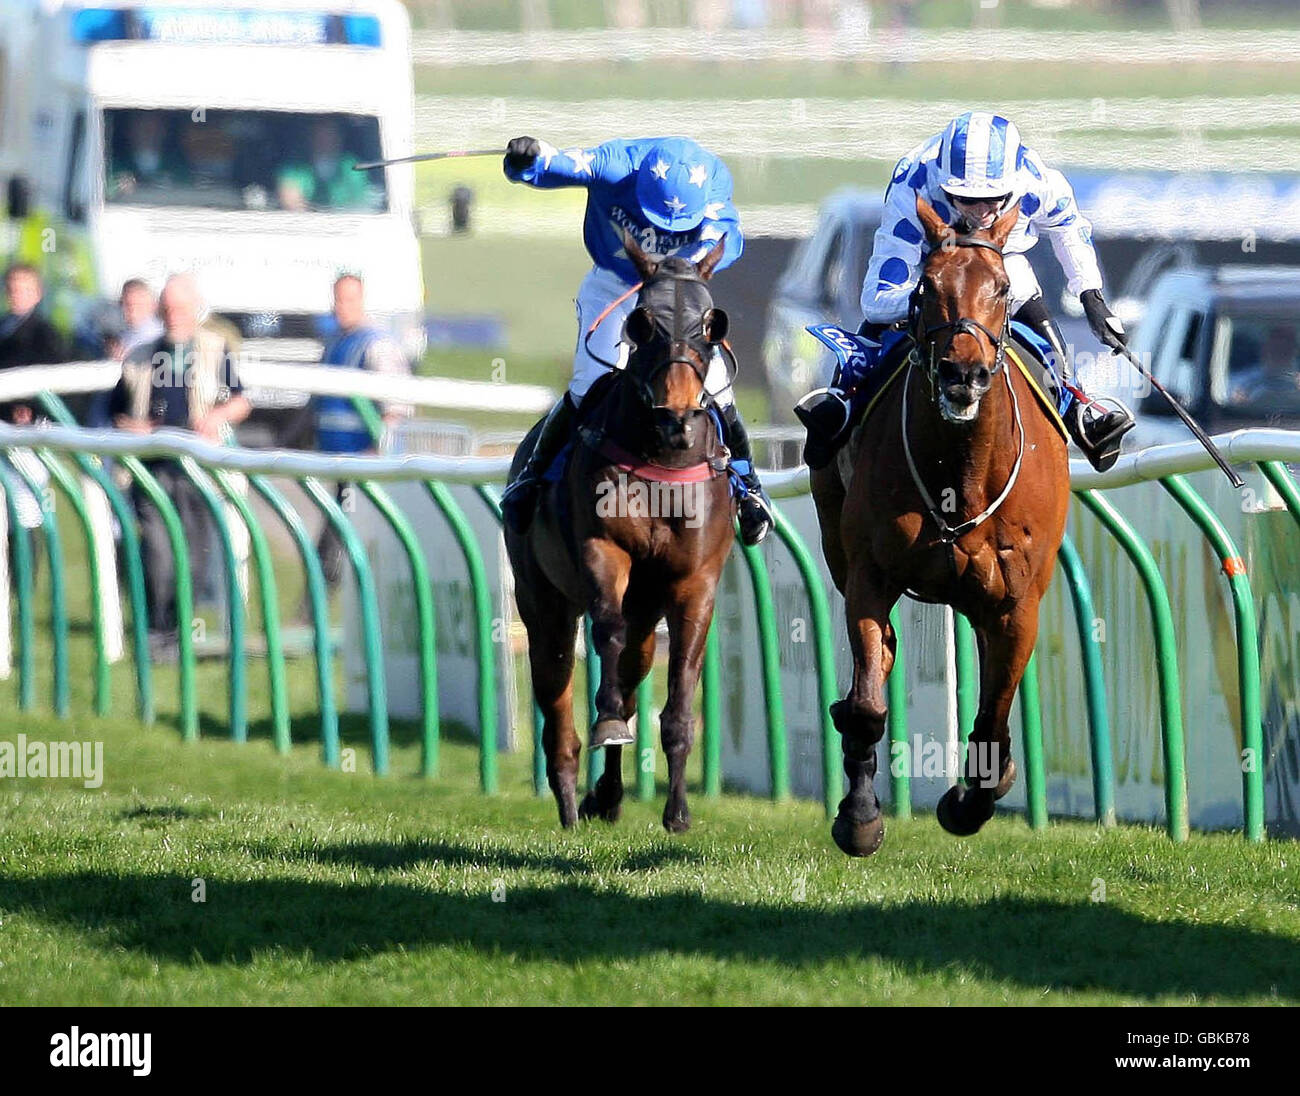 Hello Bud (right) ridden by Paddy Brennan goes on to win The Coral Scottish Grand National during Day Two of the Coral Scottish Grand National Festival at Ayr Racecourse, Ayr. Stock Photo